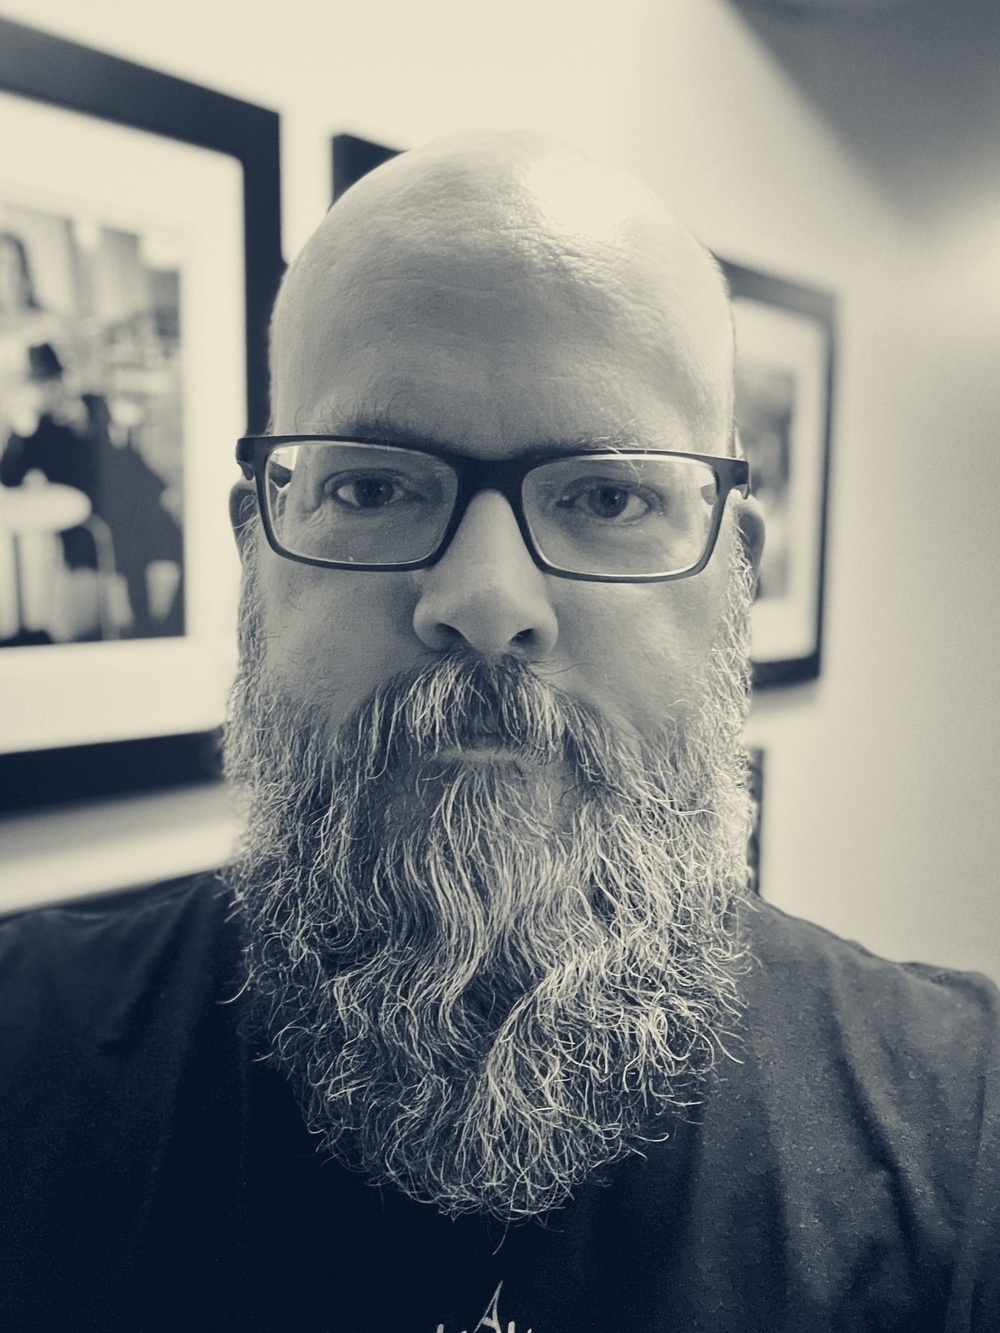 Selfie of me with my long ducktail-style beard. Thankfully my bed beard was finally coaxed out of existence after copious amounts of brushing, hoping, and blood sweat and tears. Wearing my specs and shaved head.